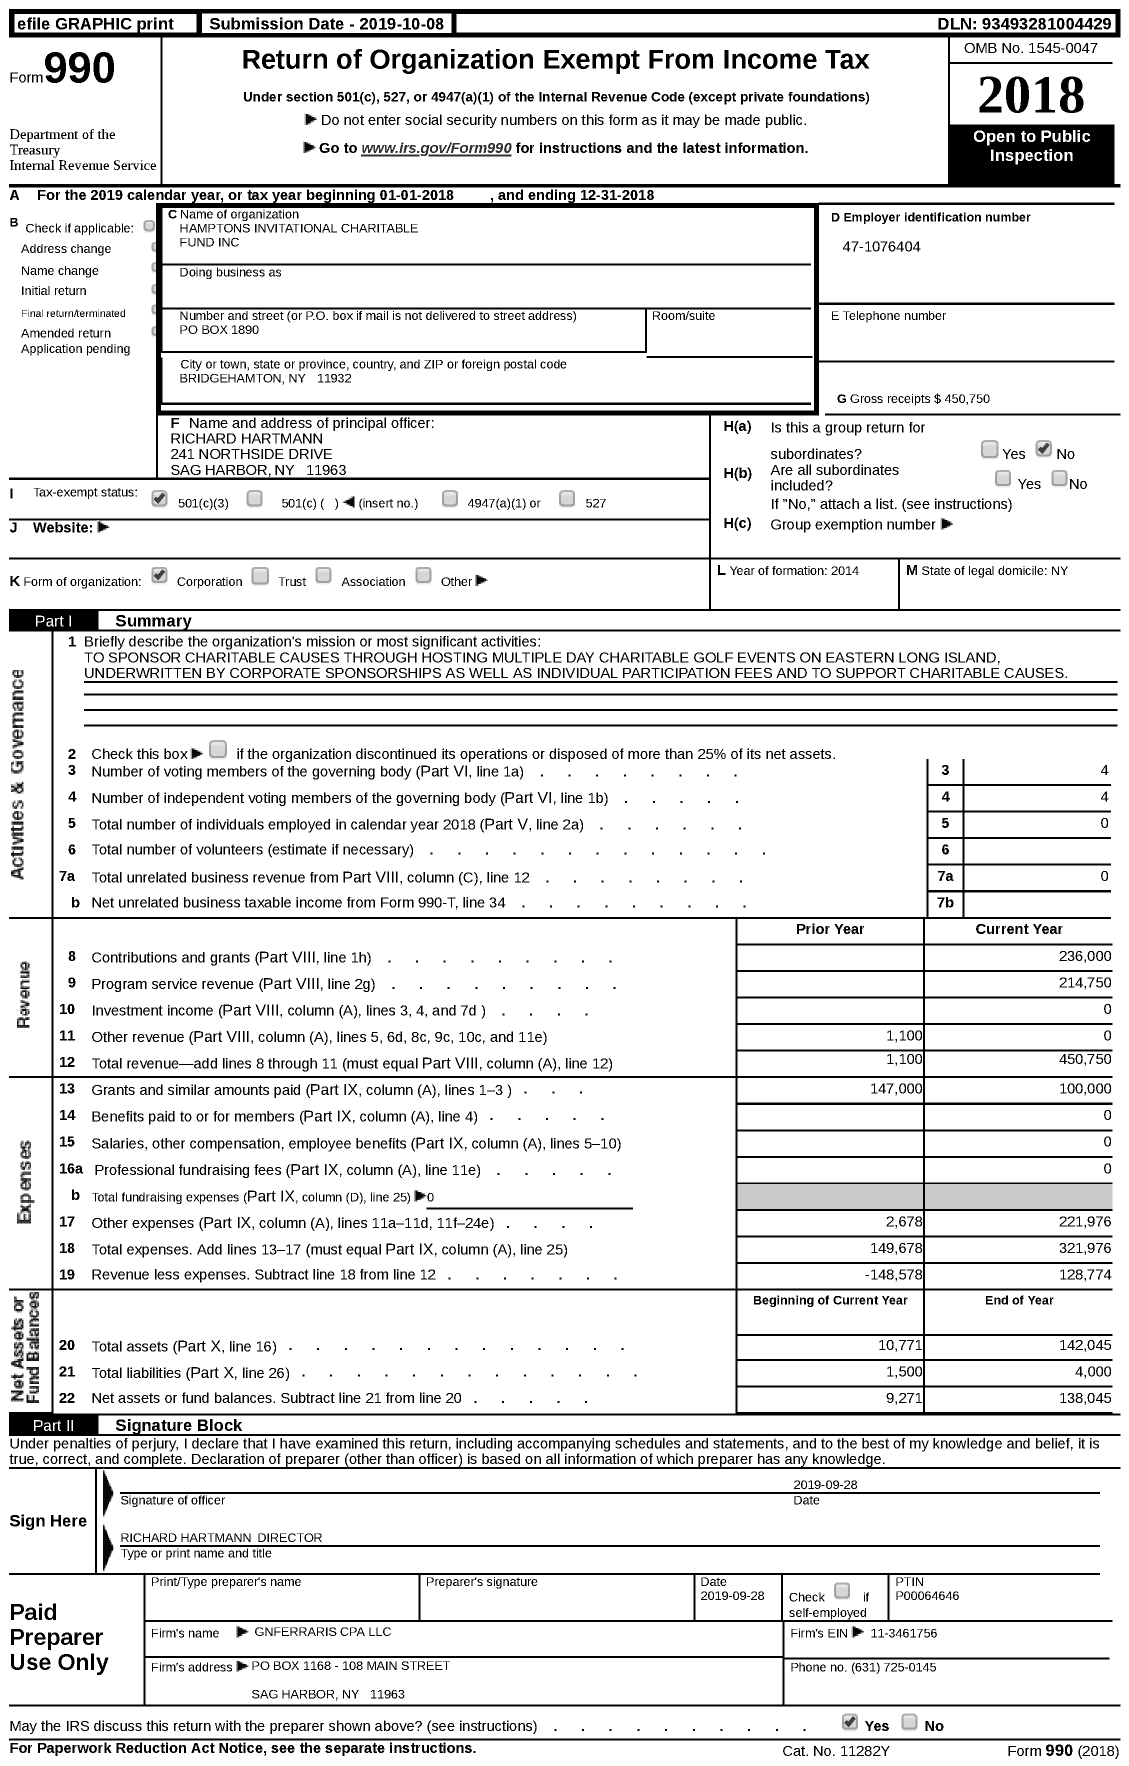 Image of first page of 2018 Form 990 for Hamptons Invitational Charitable Fund